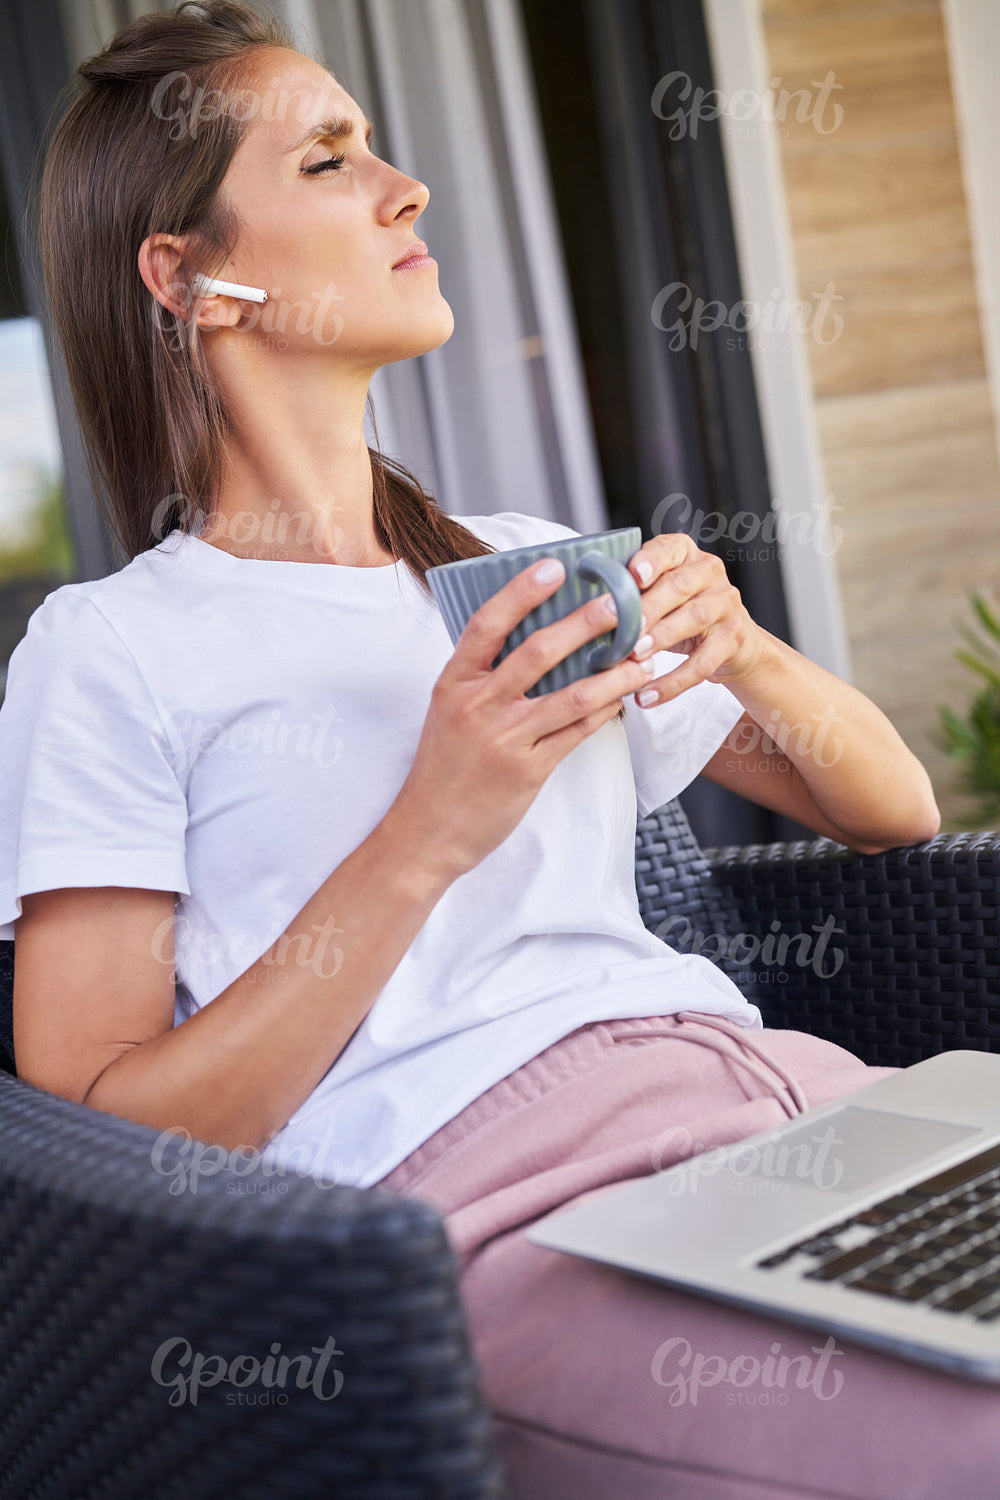 Vertical image of woman sitting outdoors